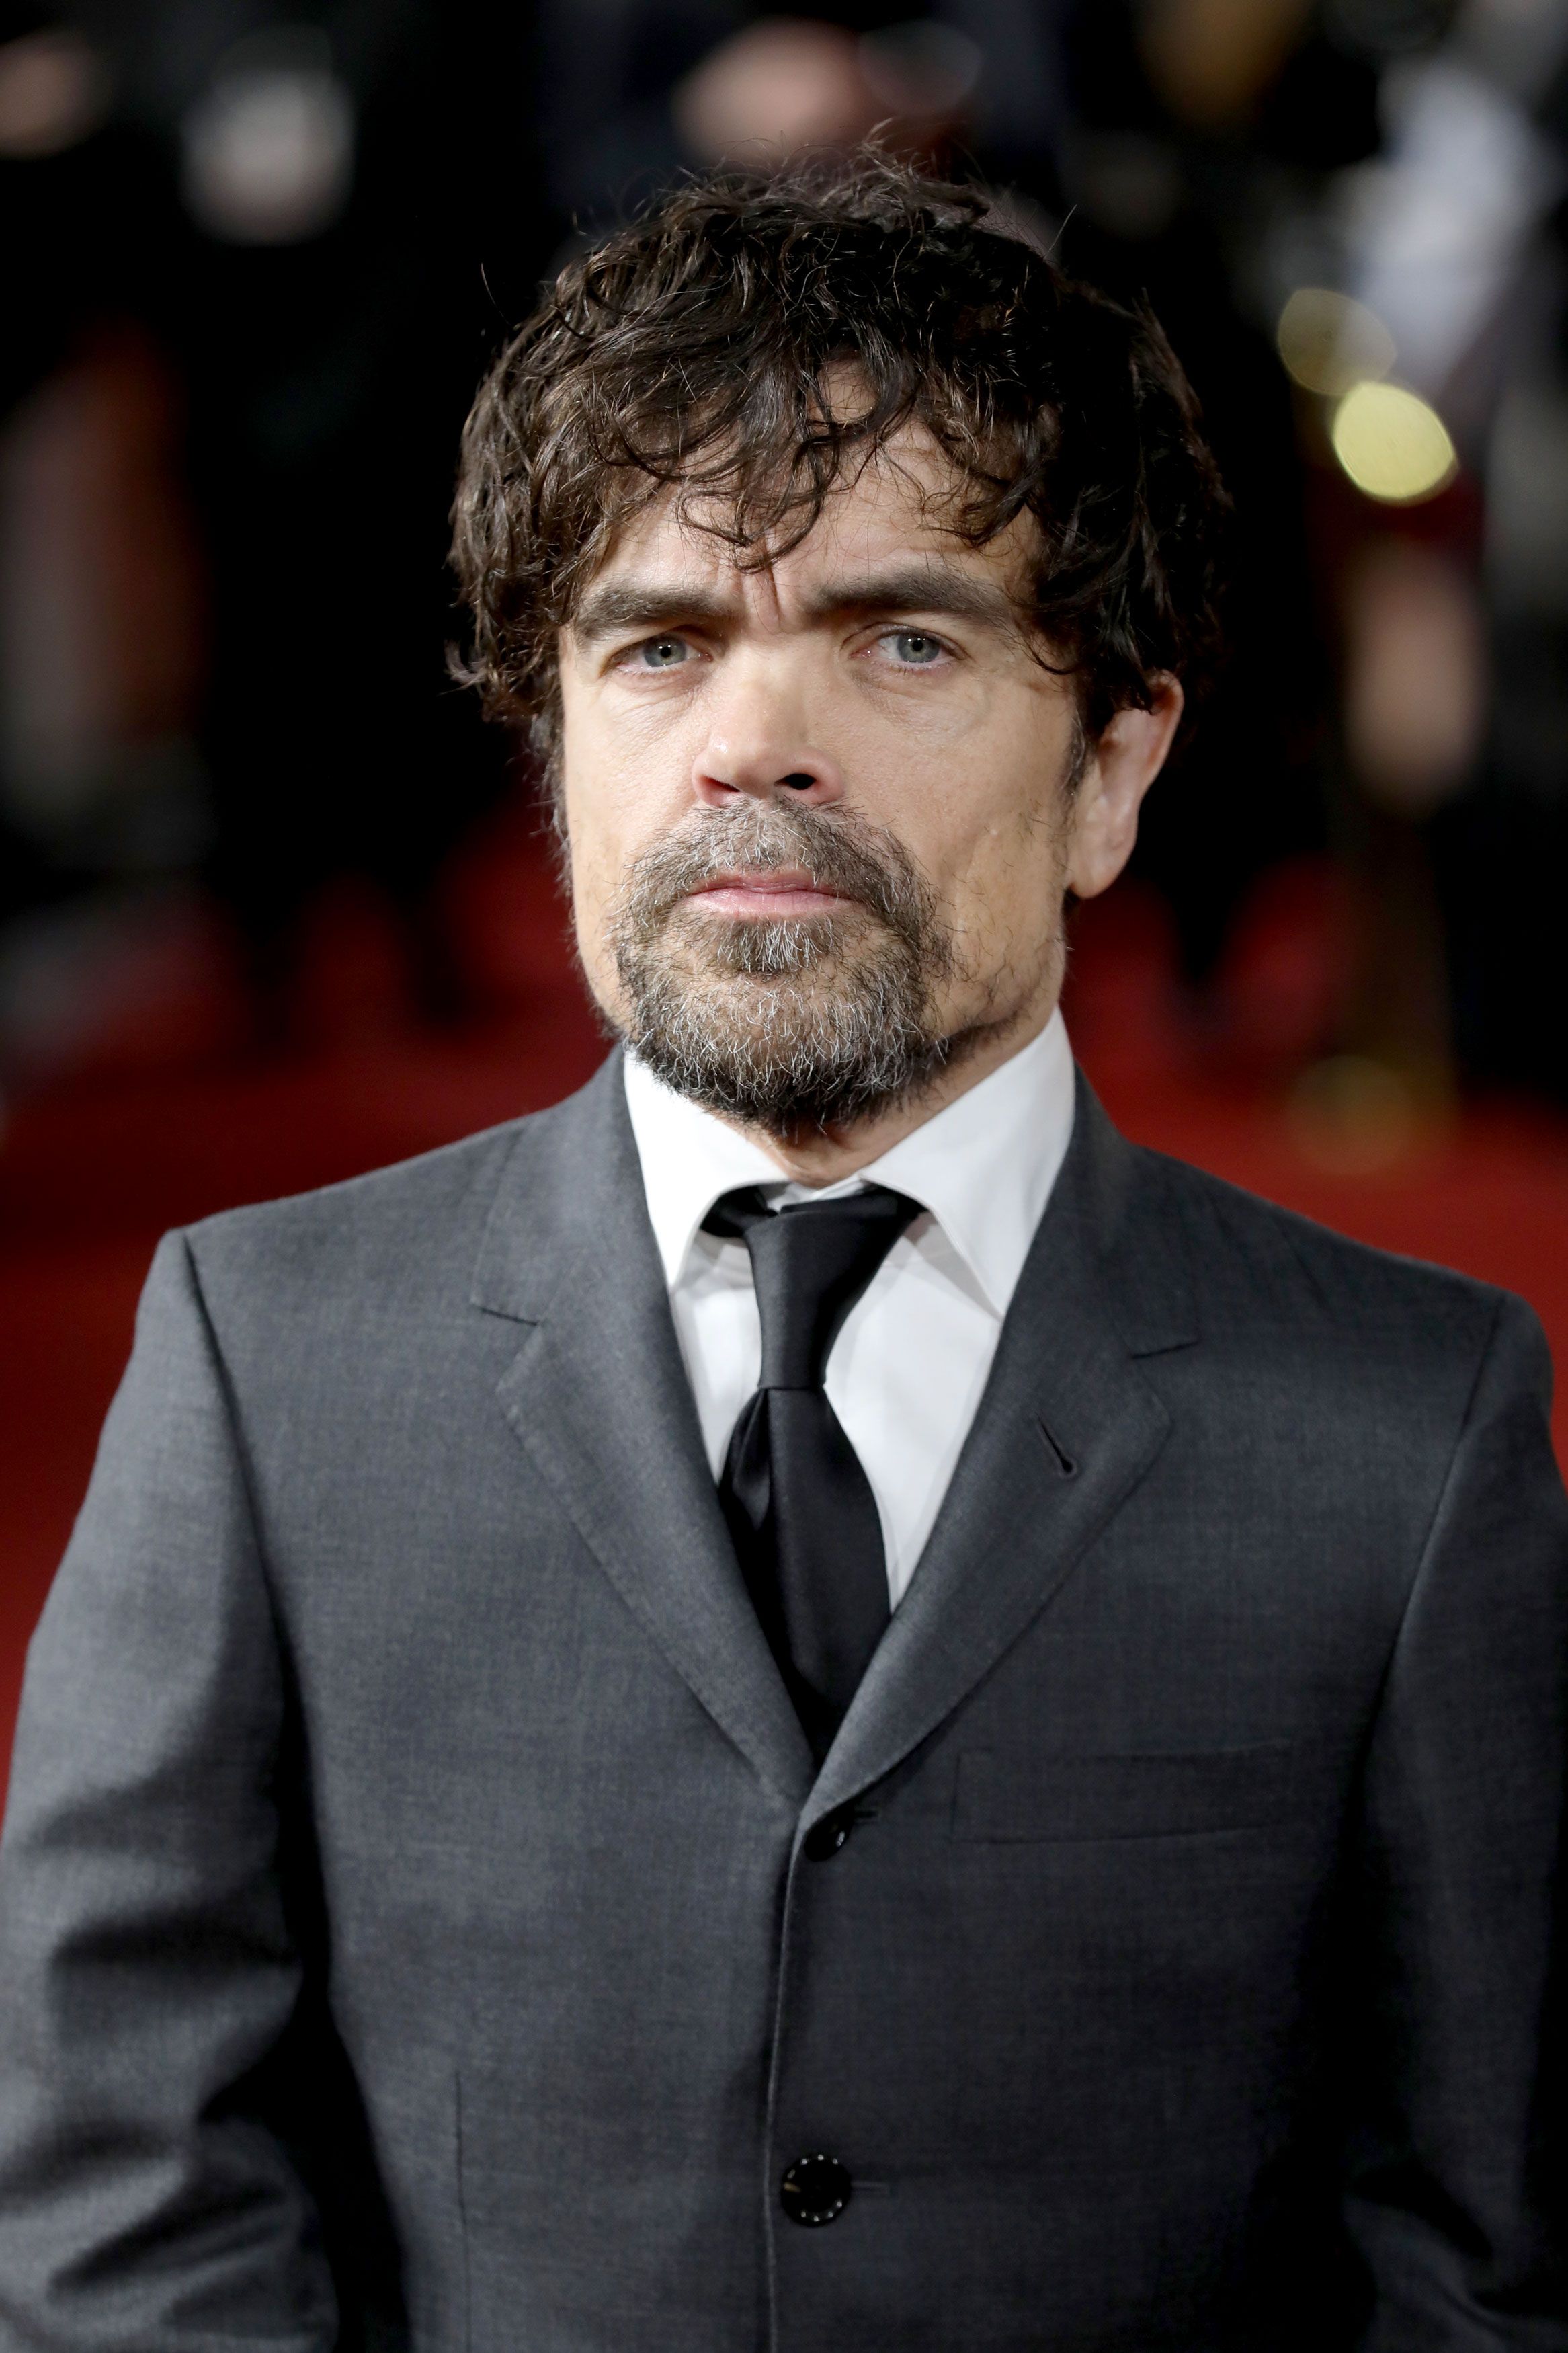 Game of Thrones' Peter Dinklage Criticises Disney's 'Snow White And The Seven Dwarfs' Remake